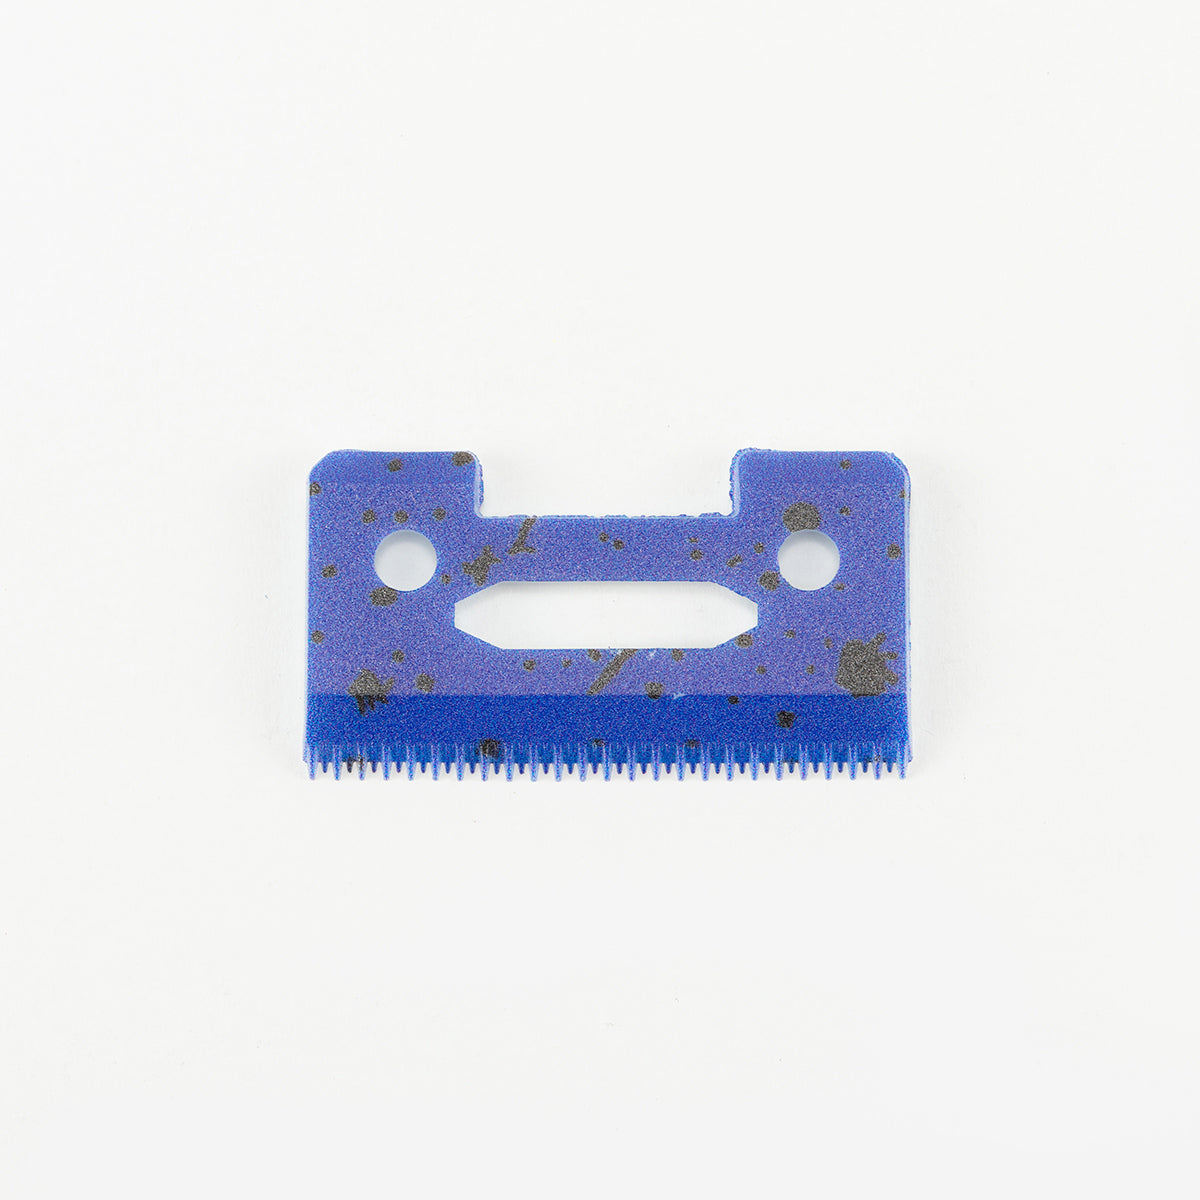 Moving Ceramic Blade Replacement in Dark Blue With 49 Skip Teeth for Shallow Cuts